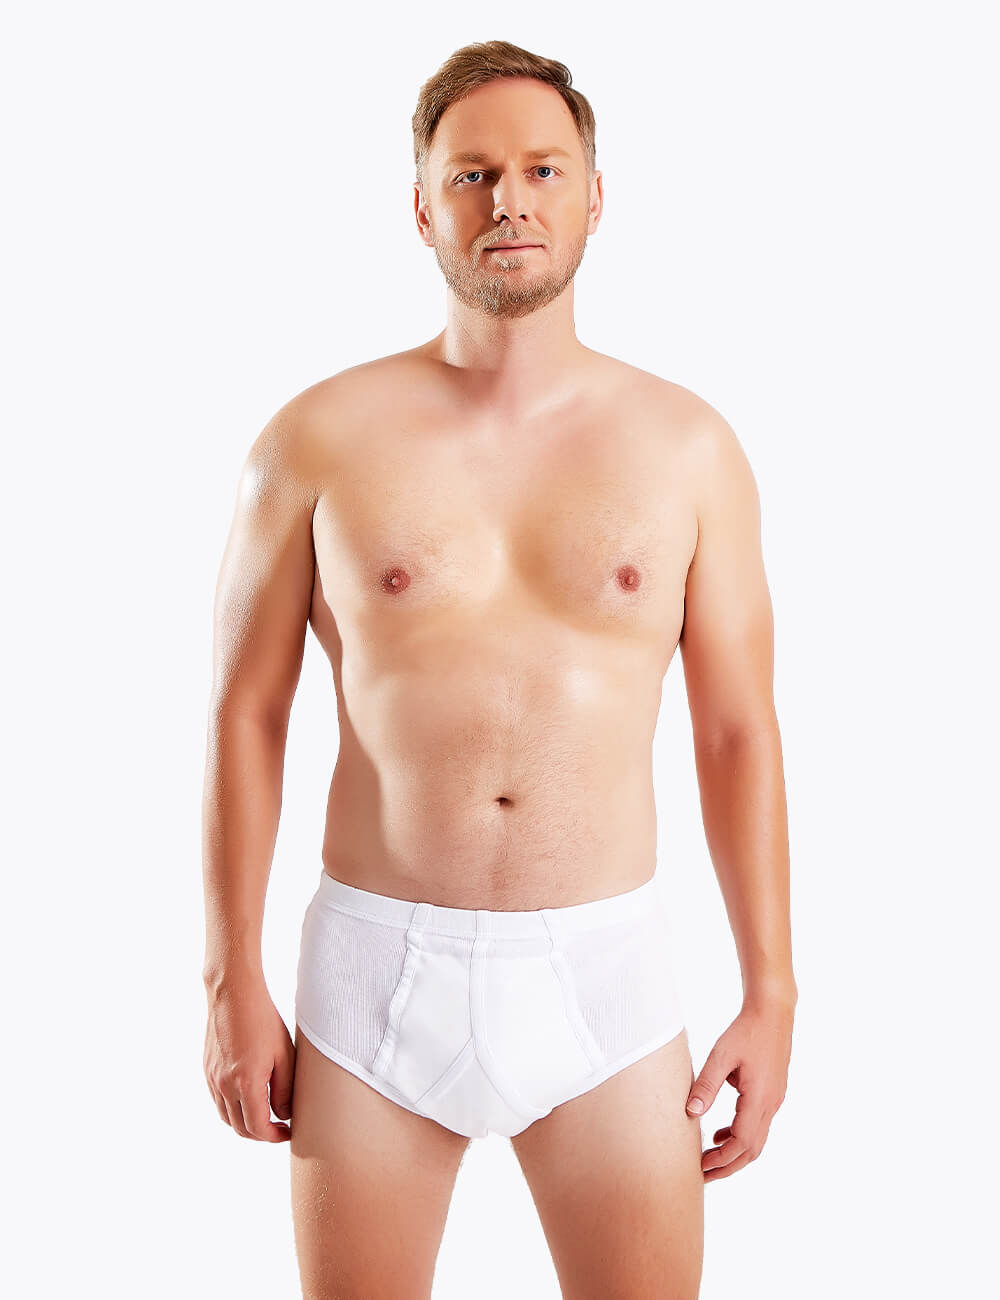 Men's Cotton Protective Absorbent Underwear for Urinary